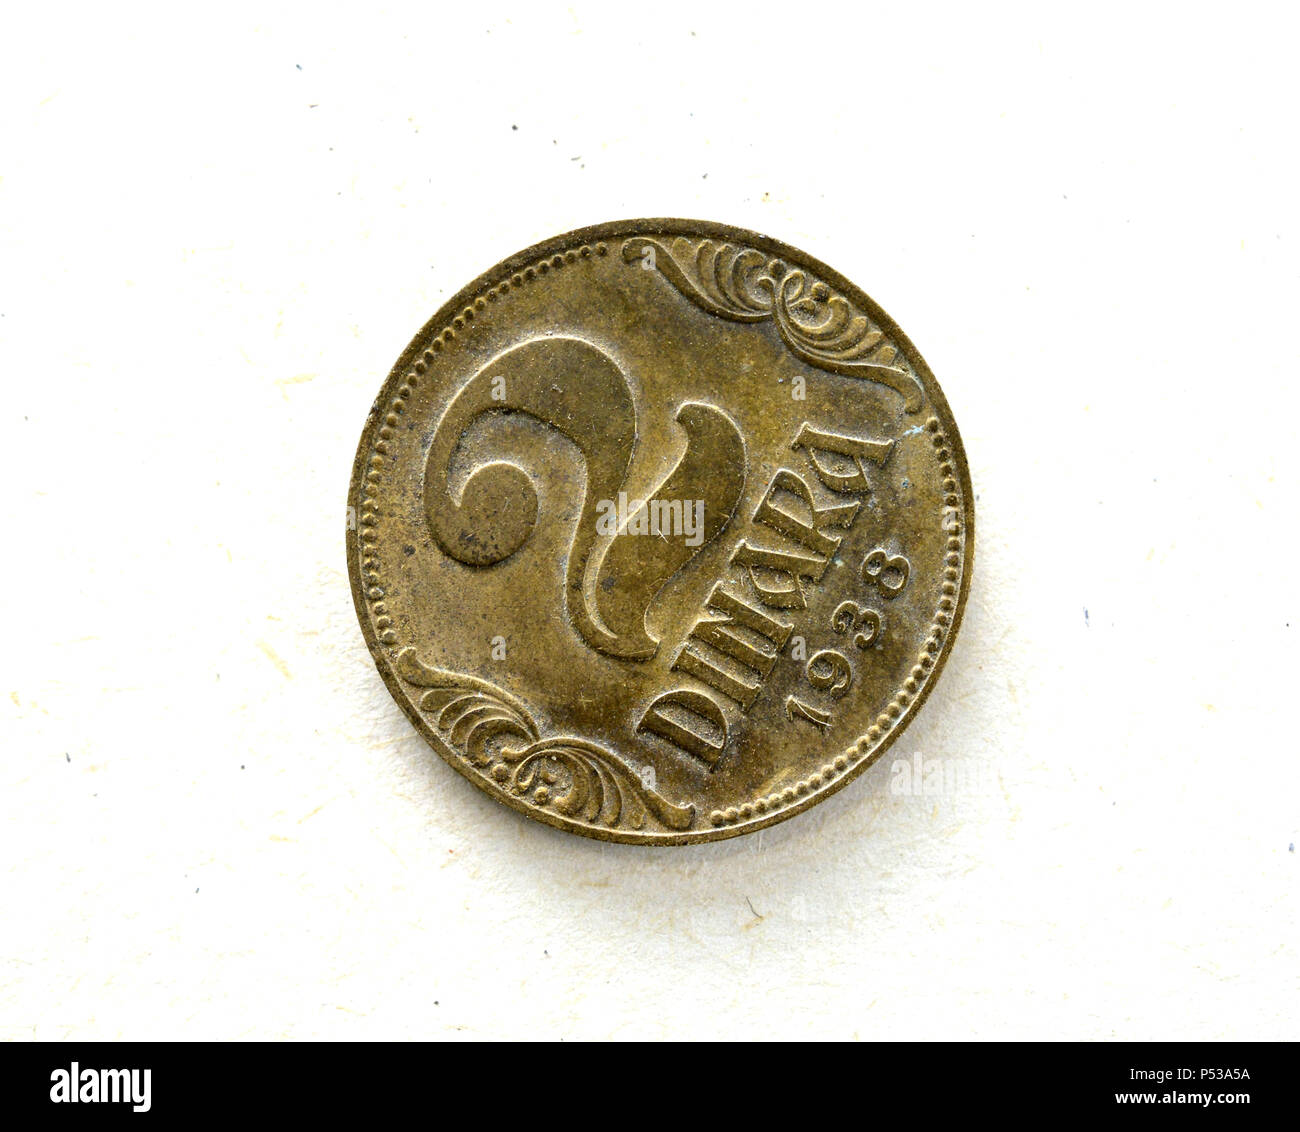 old dirty coin from yugoslavia, image of a Stock Photo